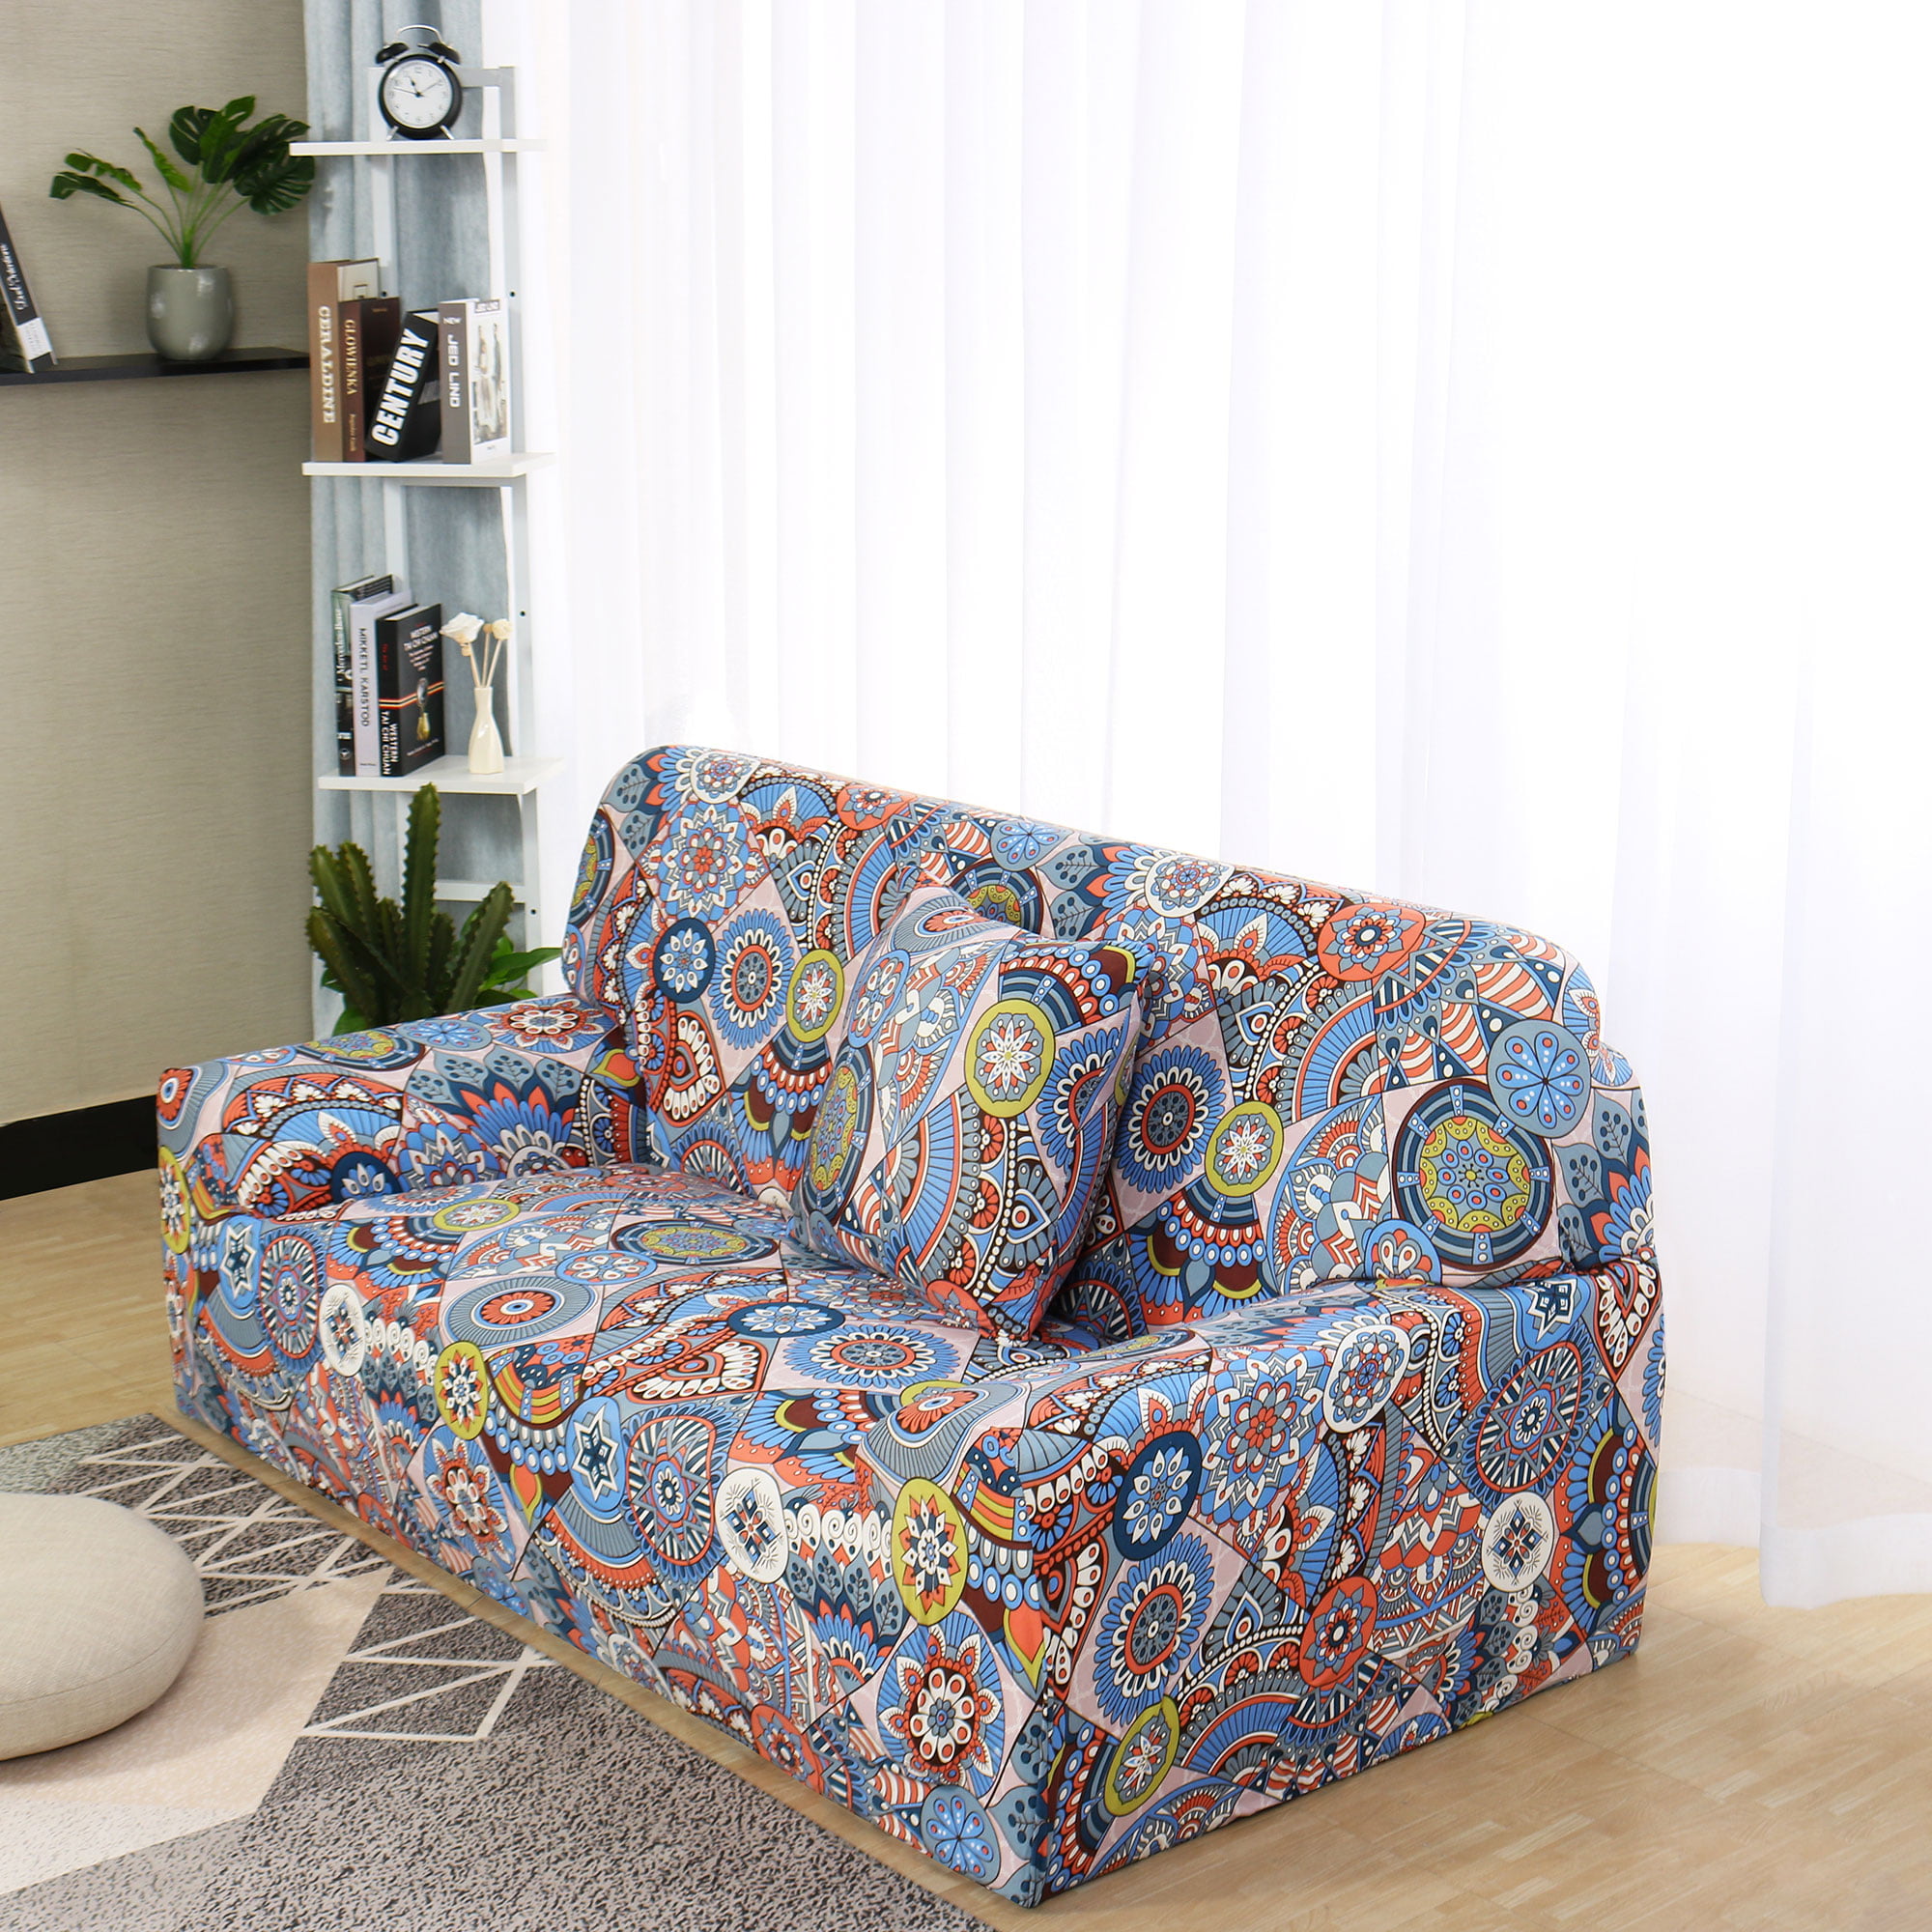 Details about   Combination Sofa Cover 1/2/3/4 Seater Non-Slip Slipcover Couch Stretch Elastic 